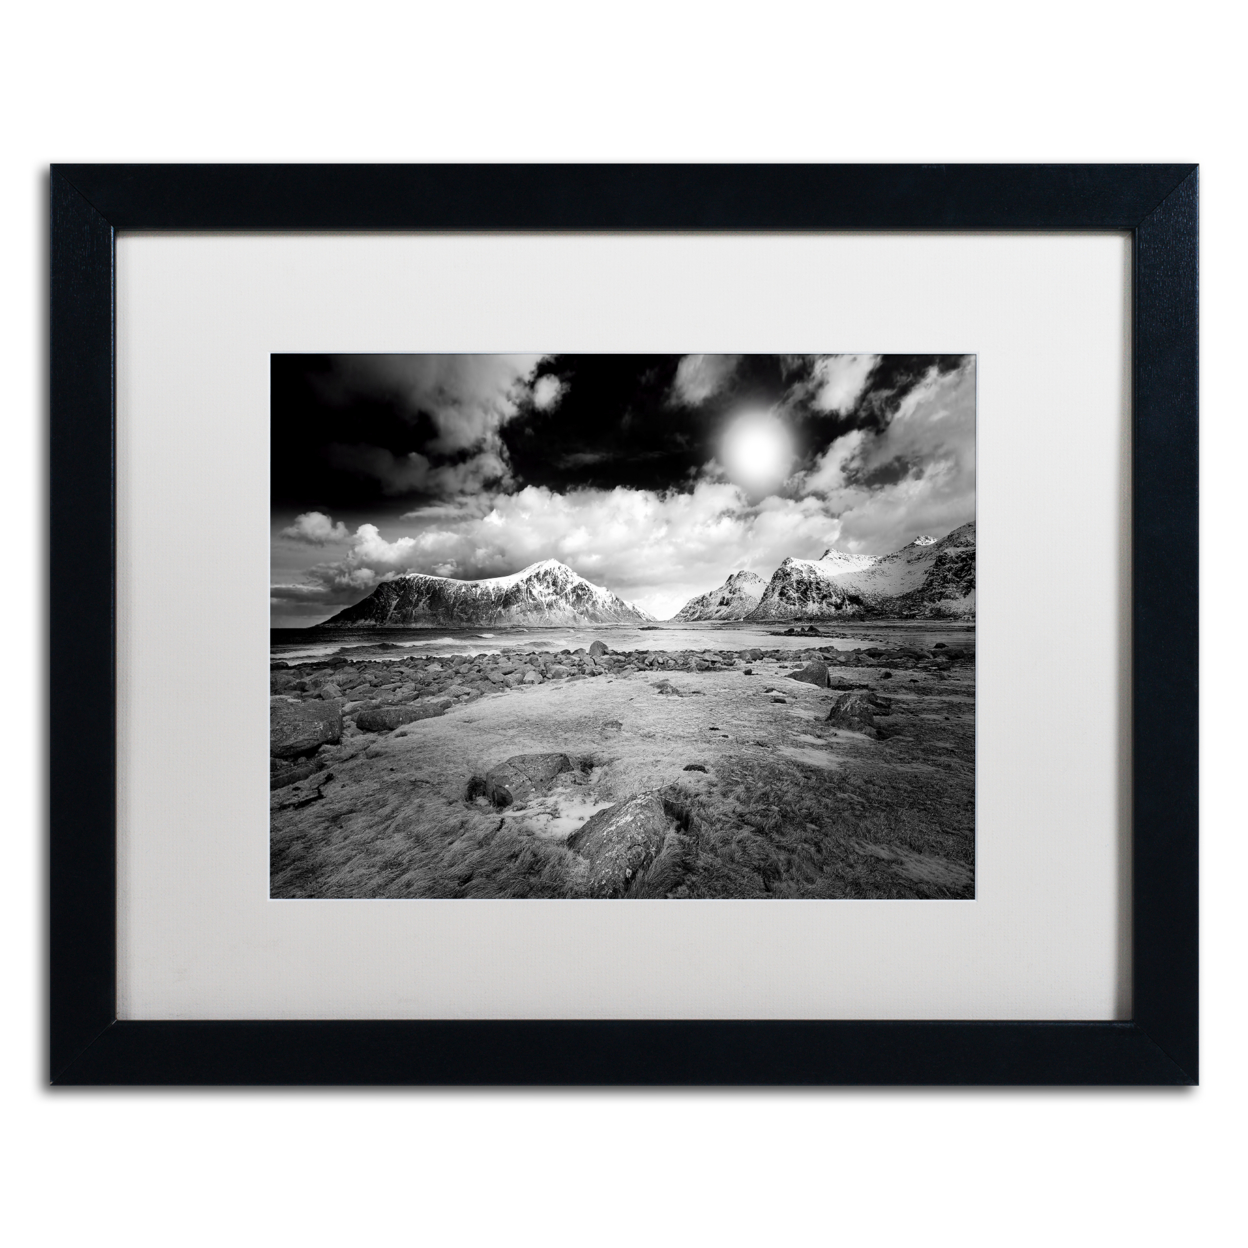 Philippe Sainte-Laudy 'Light World' Black Wooden Framed Art 18 X 22 Inches